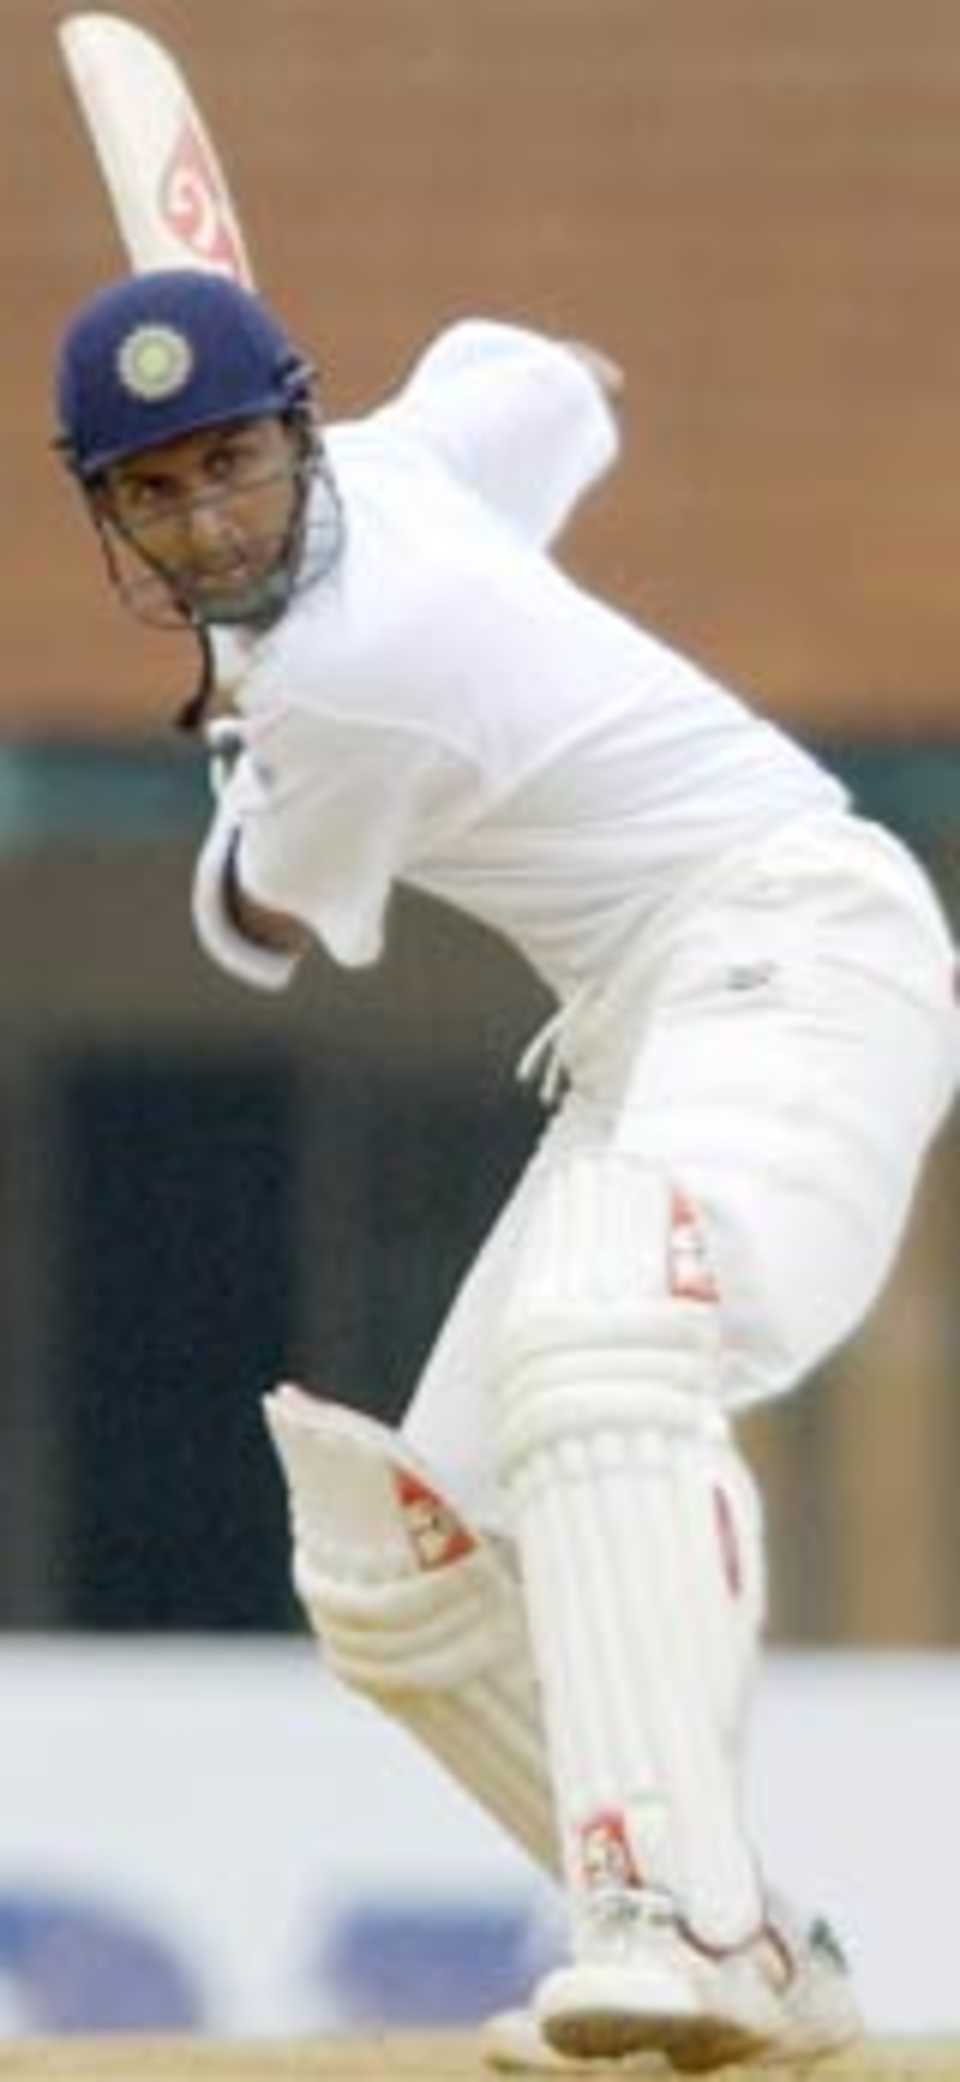 Indian cricketer Sanjay Bangar prepares to play a shot during the second day of the fiveday long Irani Trophy match in Madras, 19 September 2003. The national captain Sourav Ganguly is leading the Rest of India side against a Bombay side captained by Sachin Tendulkar